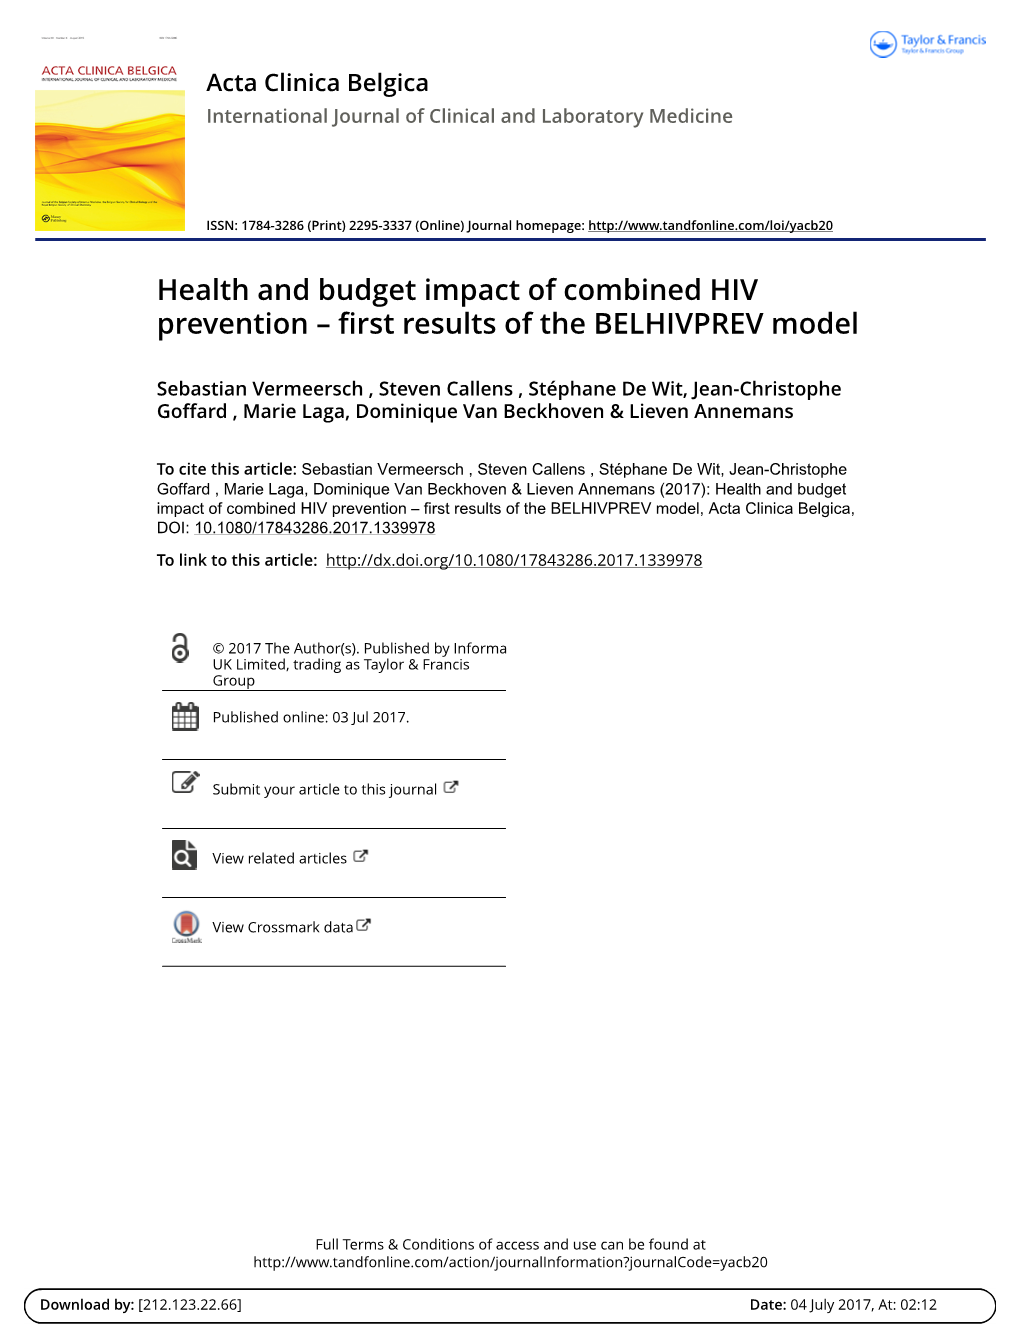 Health and Budget Impact of Combined HIV Prevention – First Results of the BELHIVPREV Model